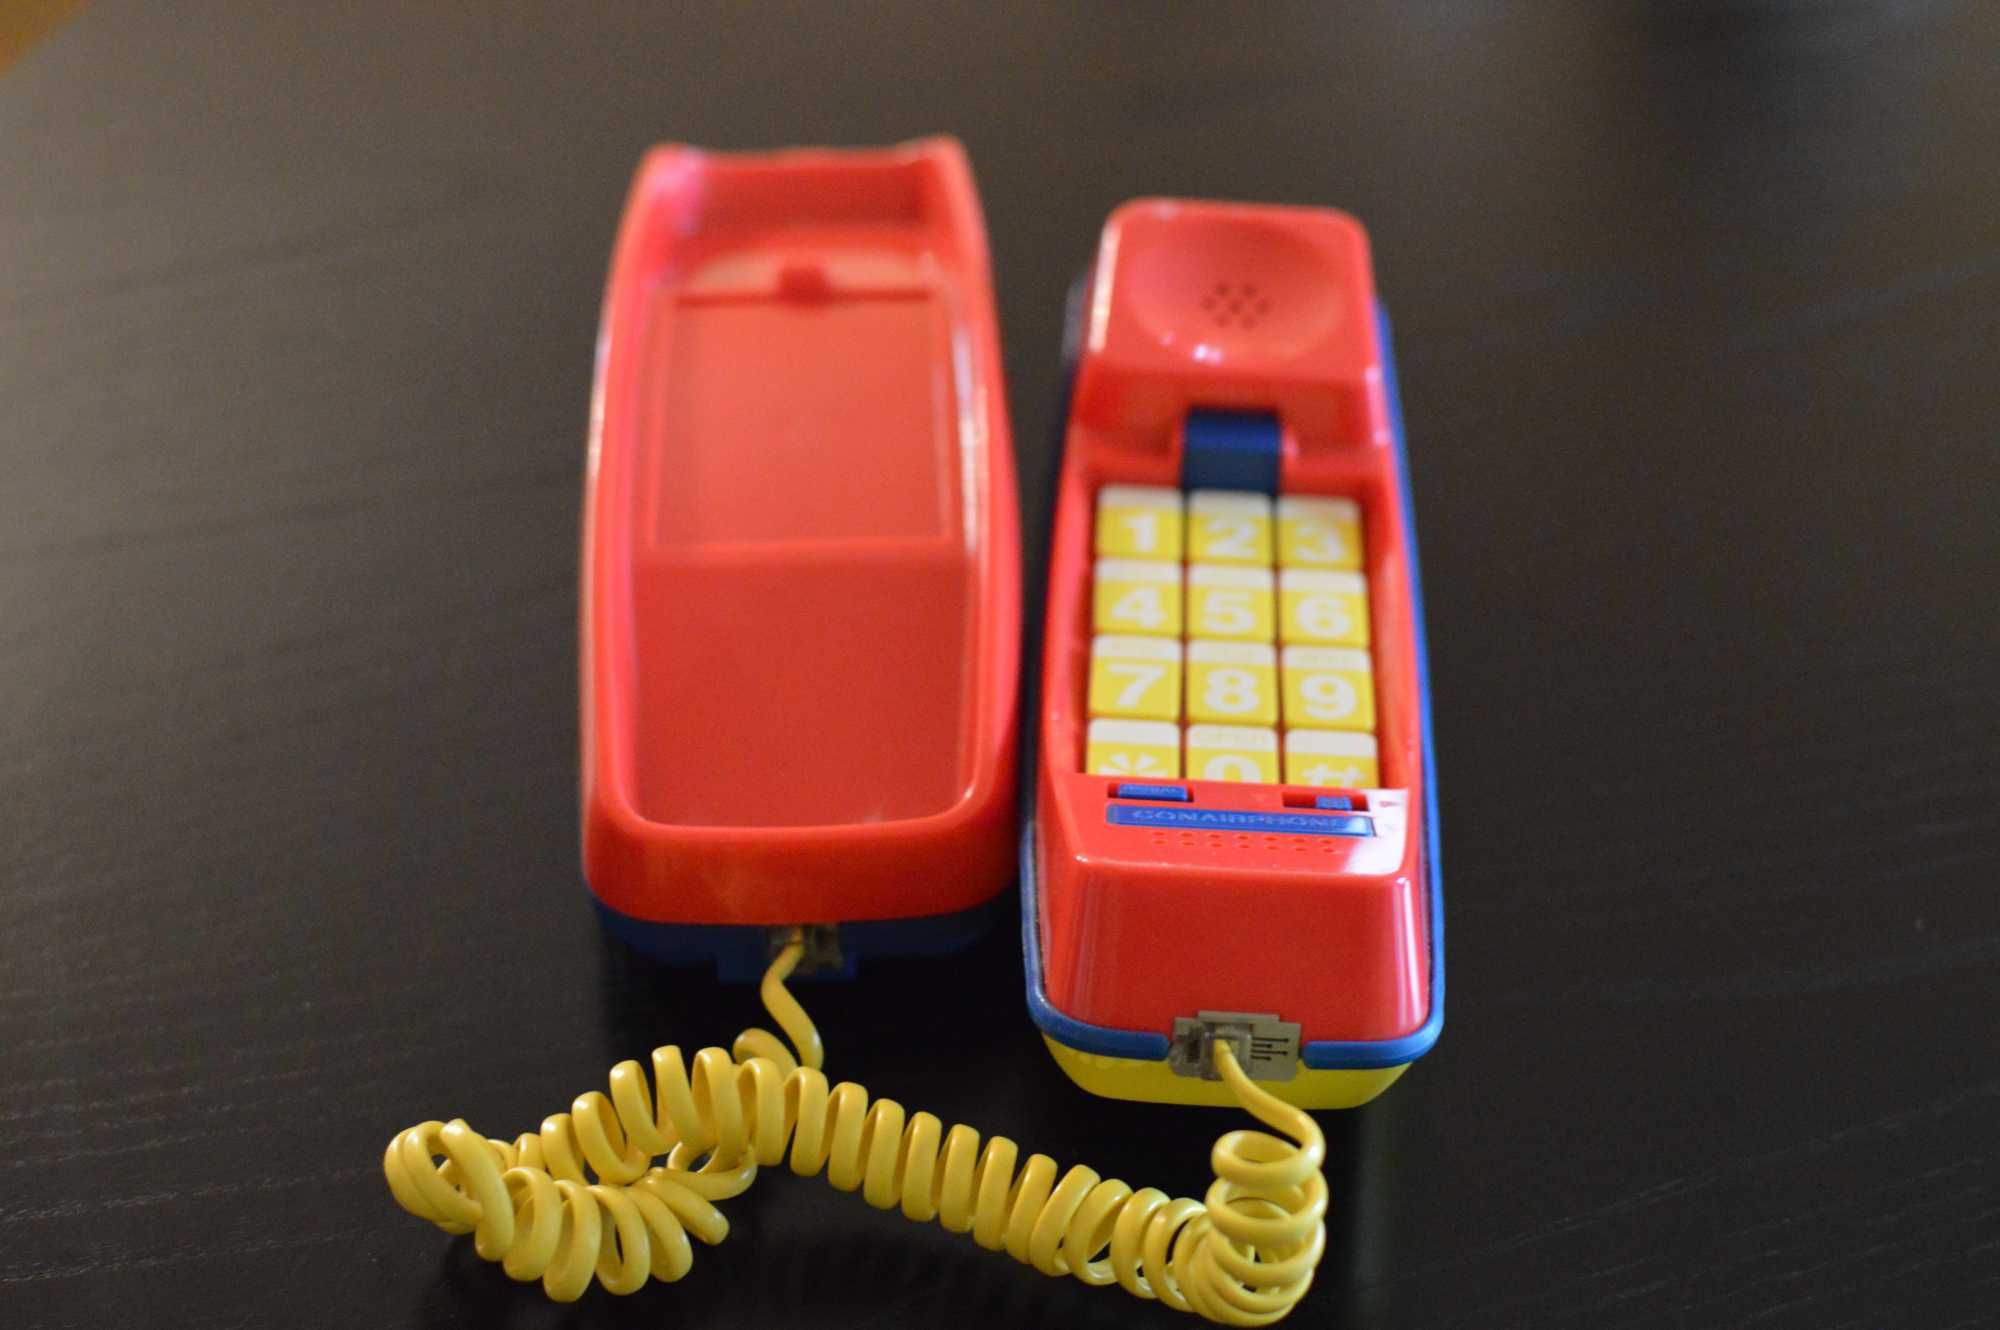 Telefone de parede vintage space age pop. Made in USA. Midcentury.